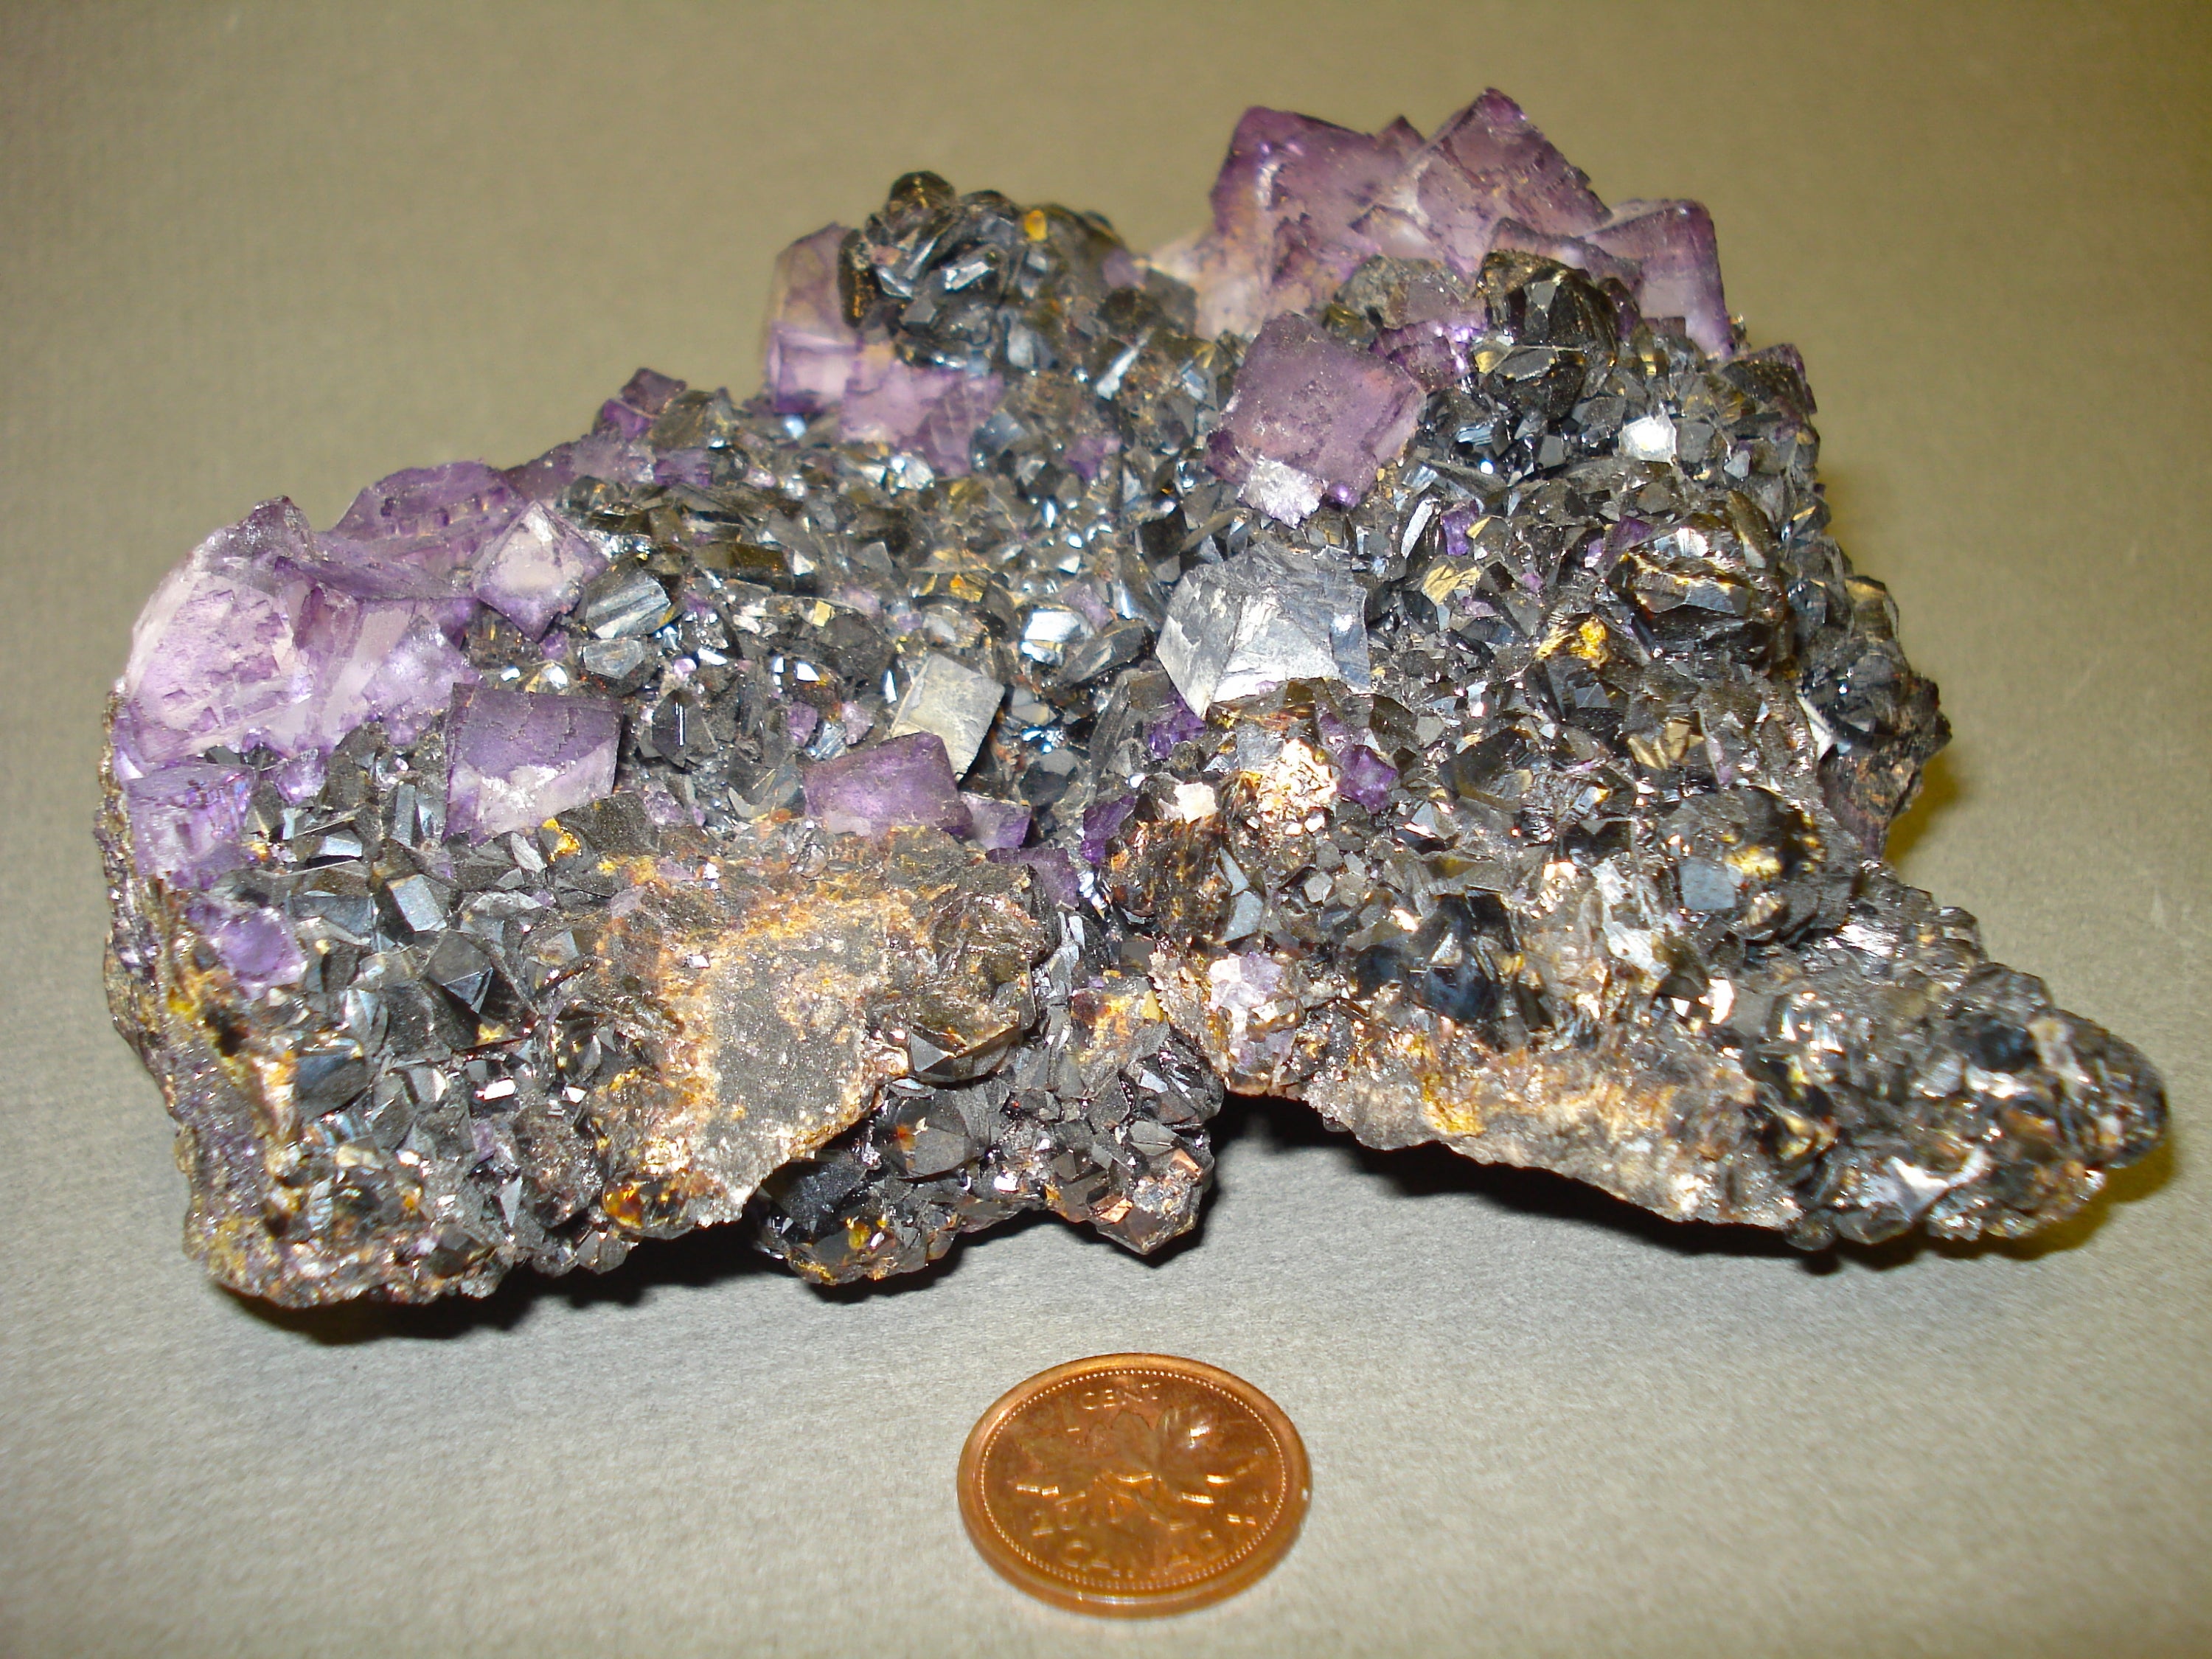 Fluorite, Galena and Sphalenite next to a penny for size comparison